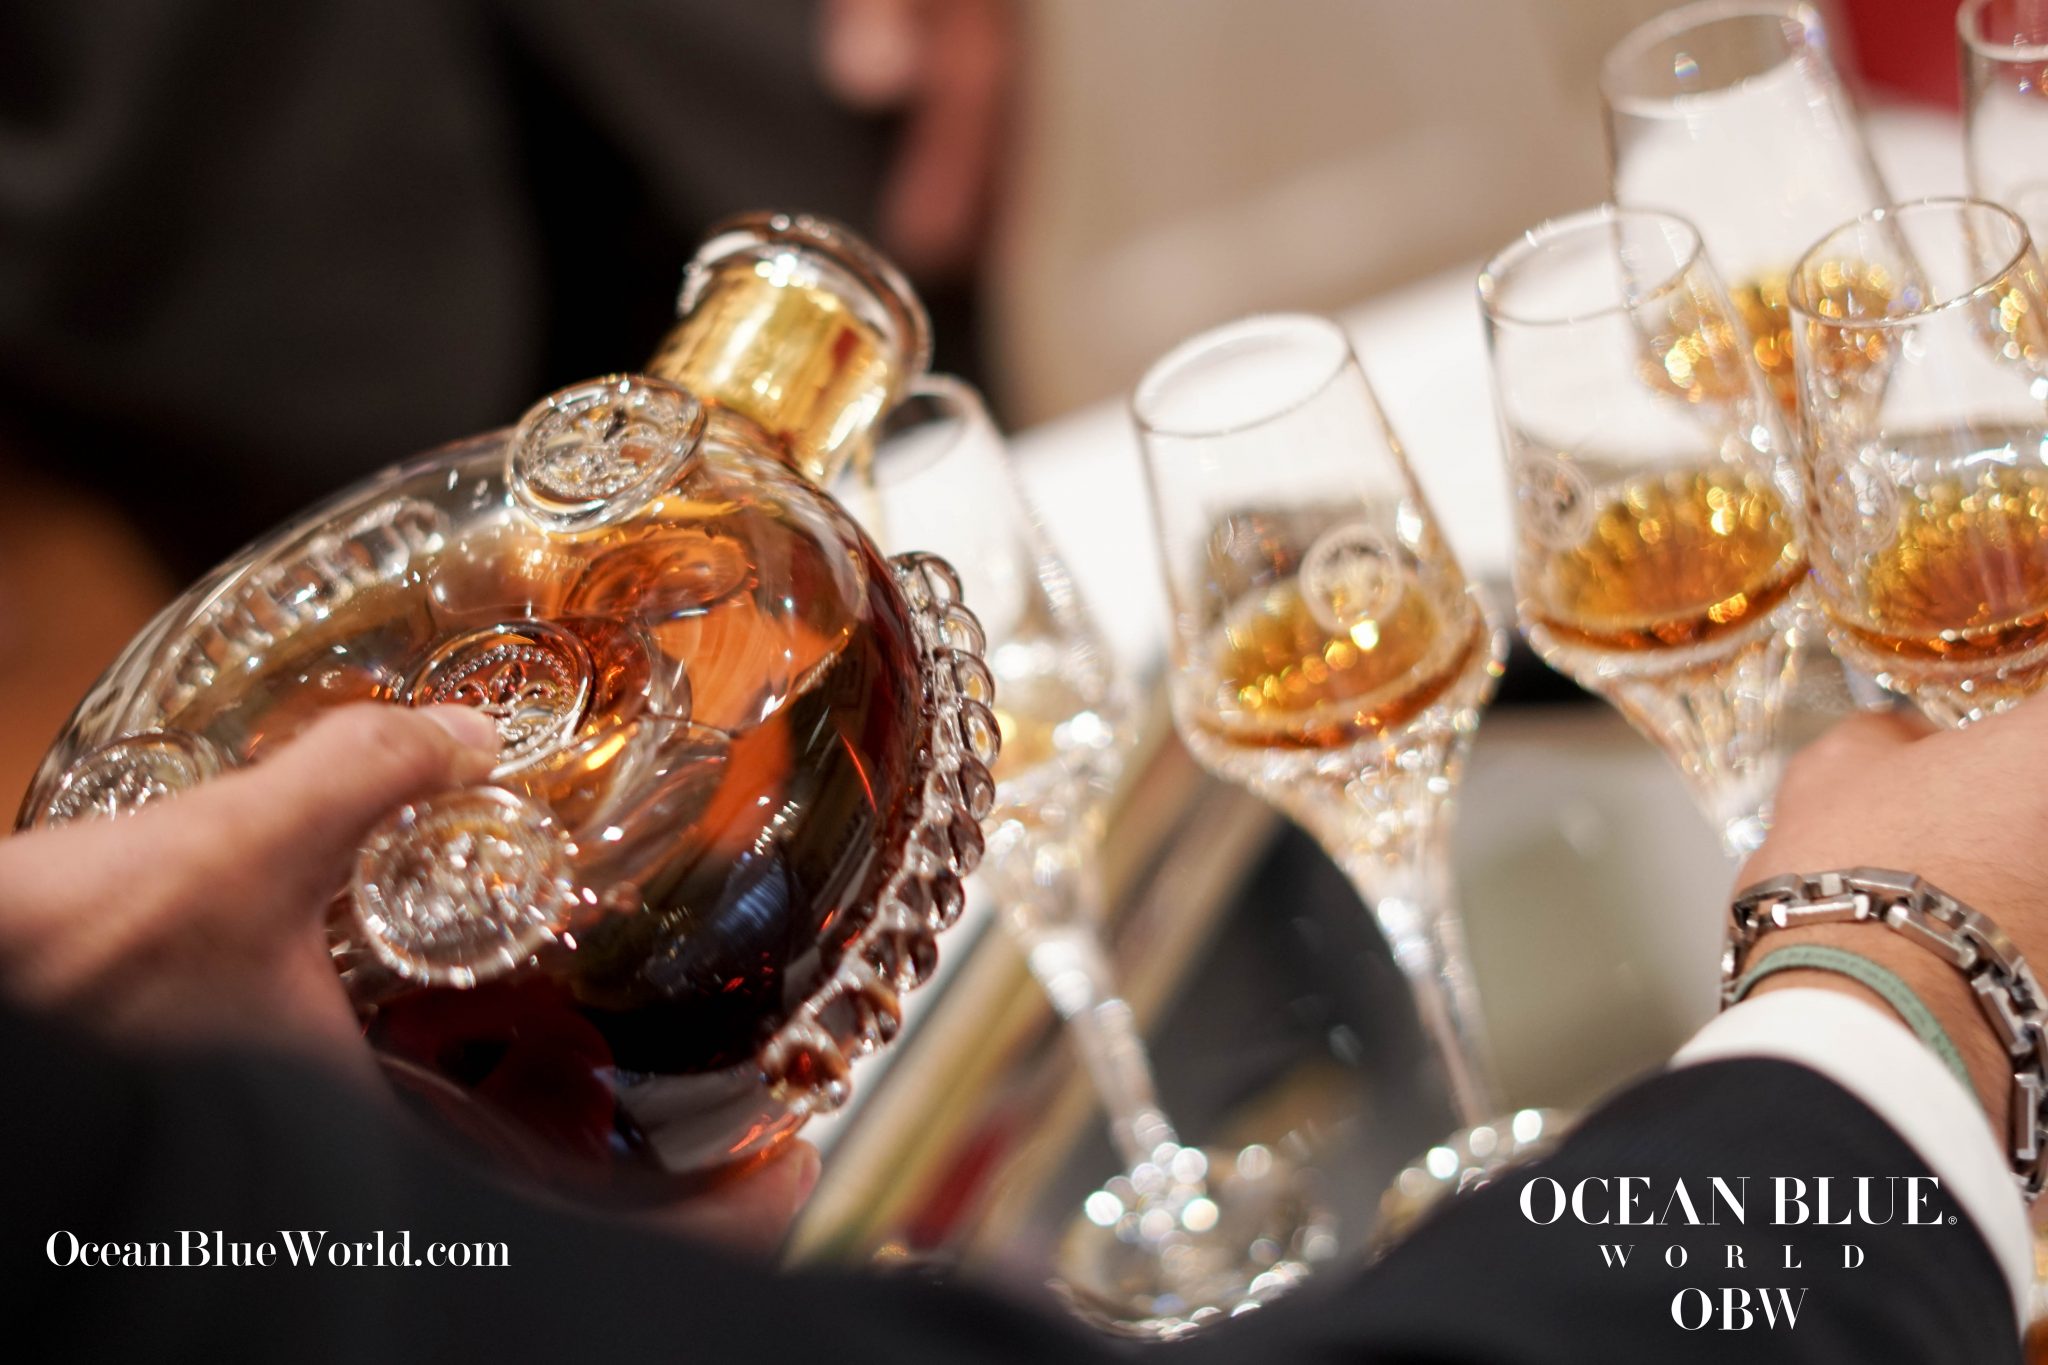 Louis XIII Cognac with Ocean Blue World Celebrates “100 Years” in Mexico City